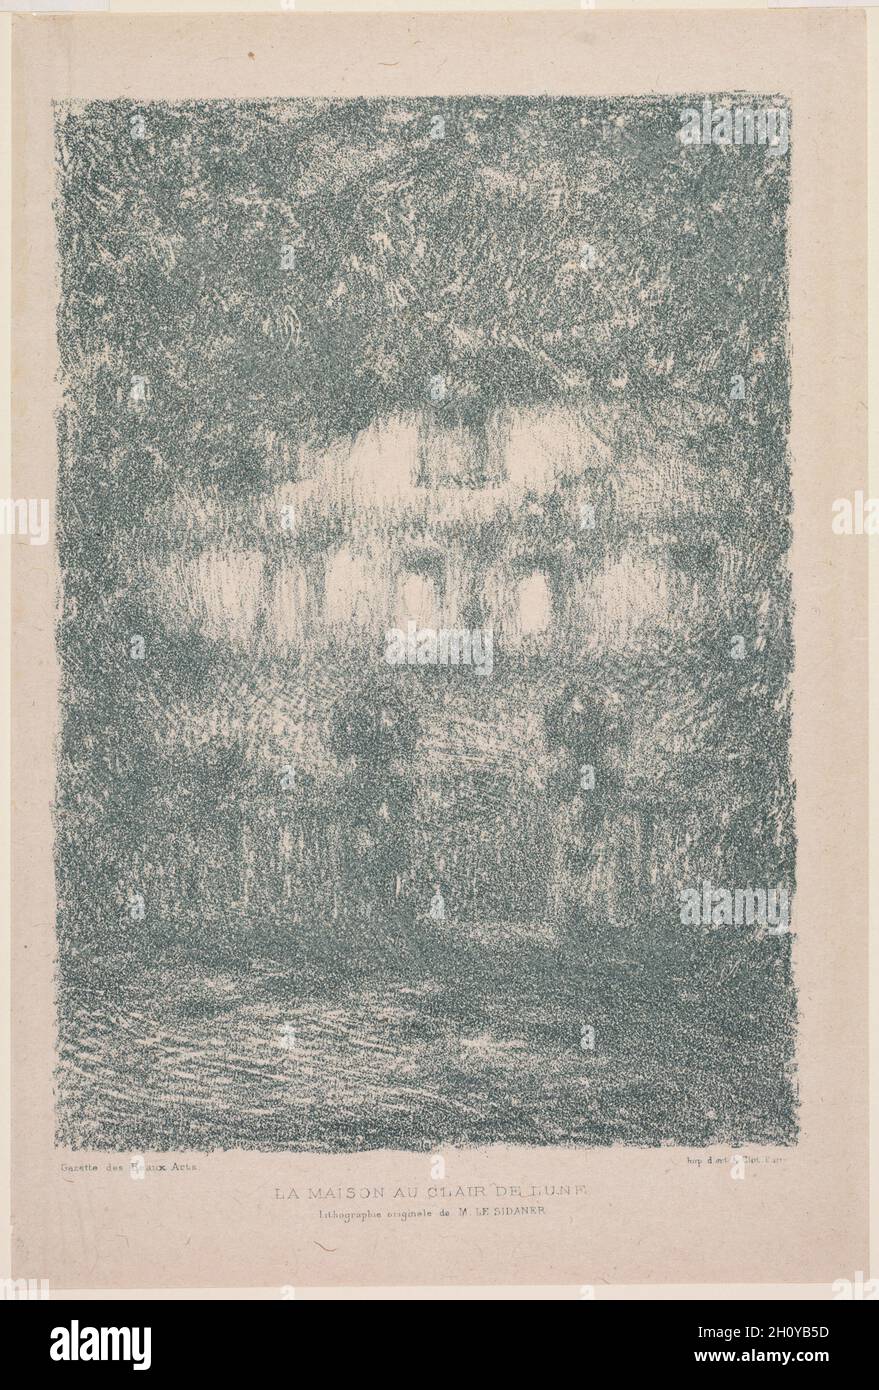 The House in Moonlight, 1909. Henri Le Sidaner (French, 1862-1939), Gazette des Beaux Arts. Lithograph printed in green; sheet: 27.5 x 18.6 cm (10 13/16 x 7 5/16 in.); image: 22.6 x 16.1 cm (8 7/8 x 6 5/16 in.). Stock Photo